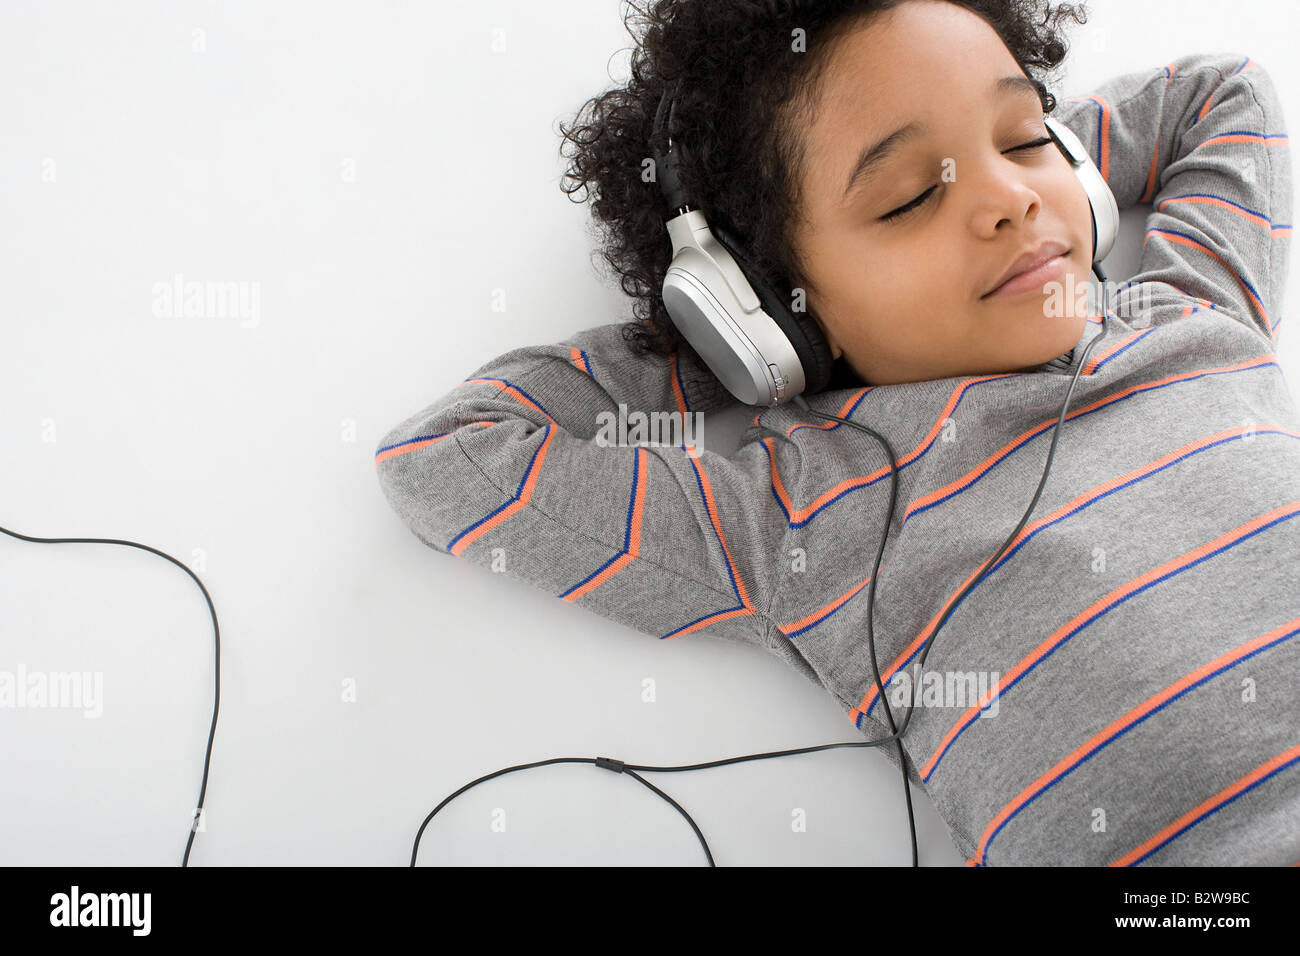 Boy listening to music Banque D'Images